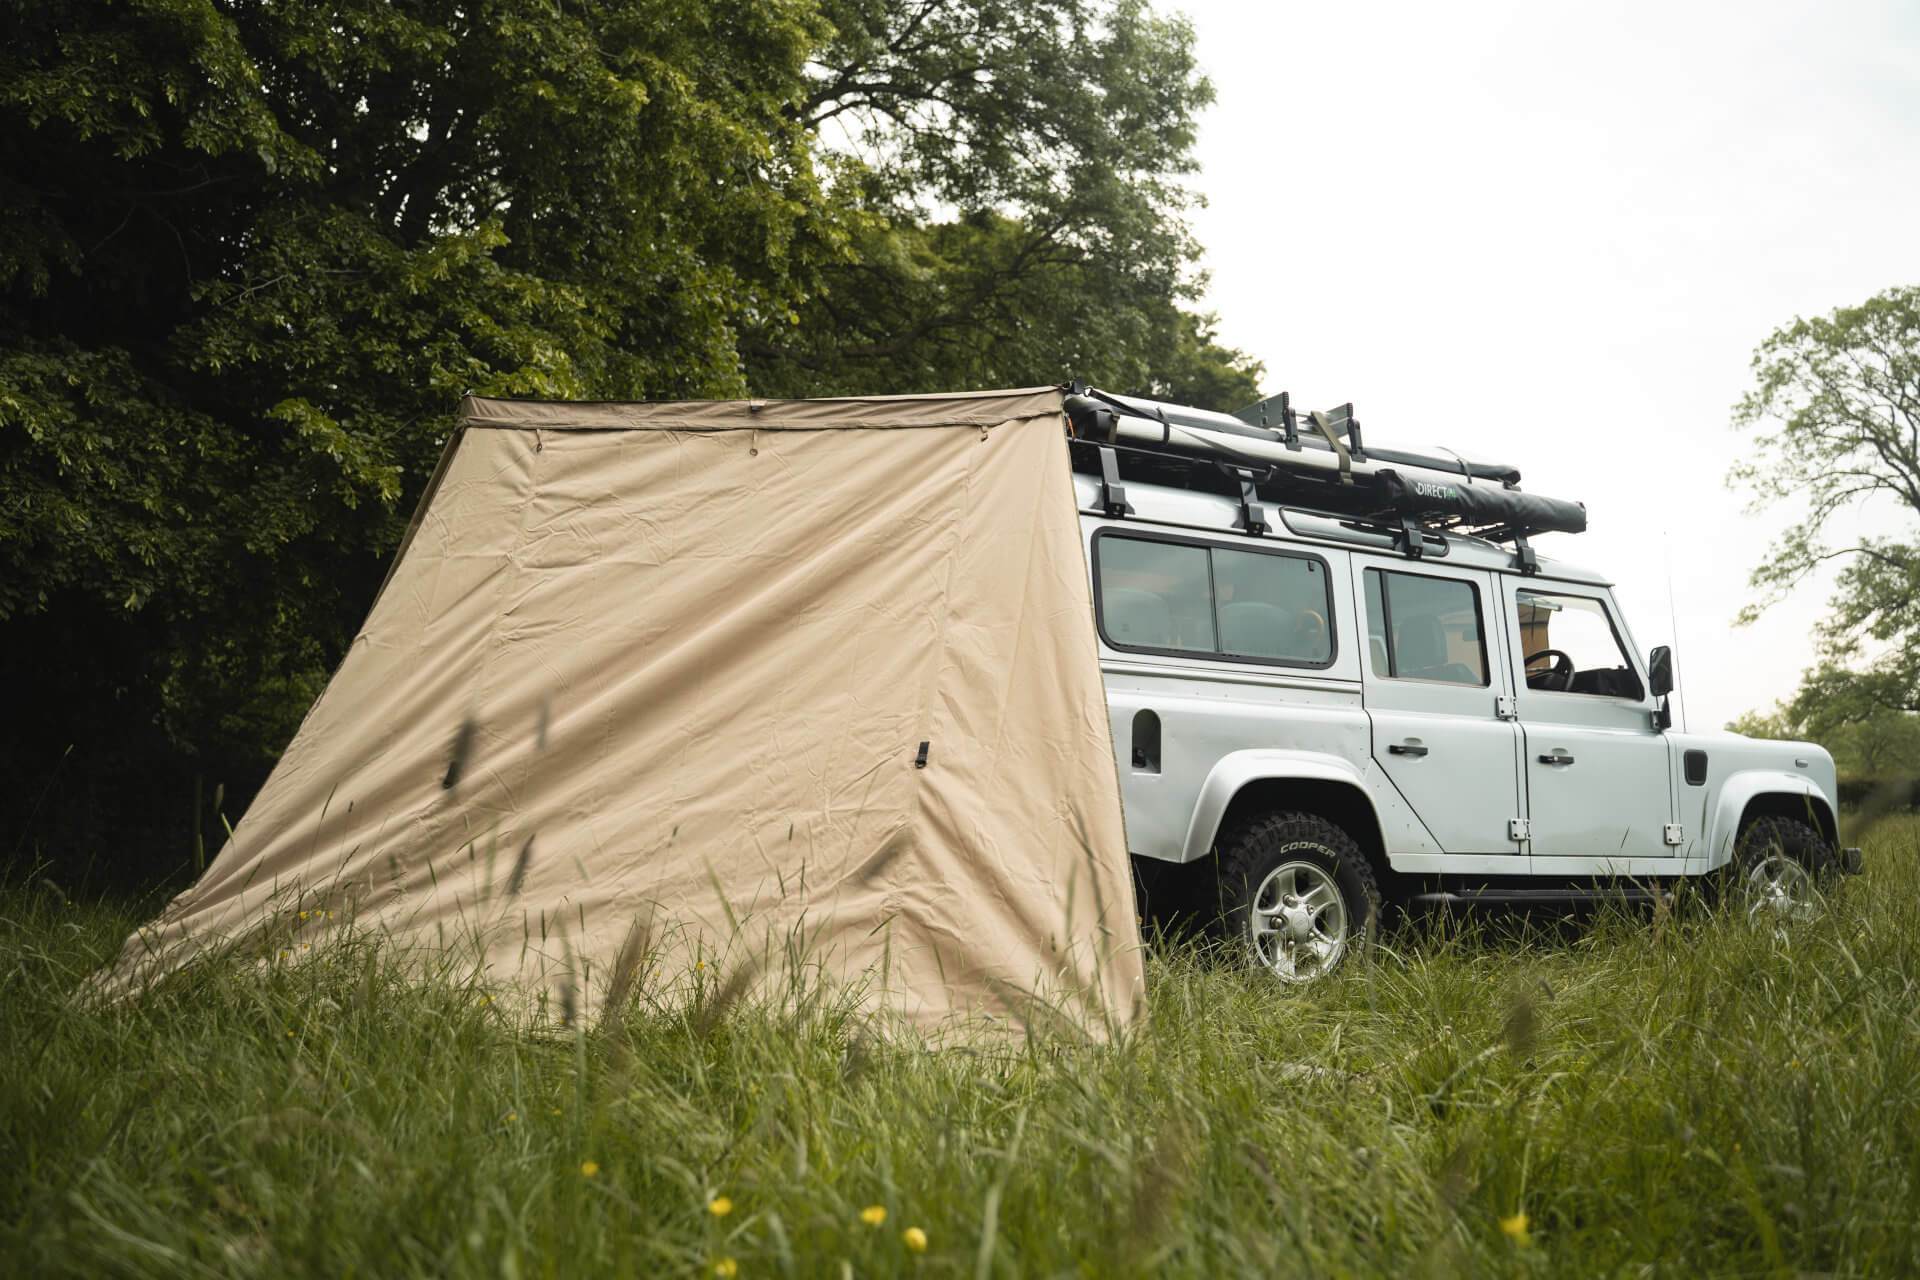 Granite Grey Side Walls for Direct4x4 270 Degree Overland Expedition Awning -  - sold by Direct4x4